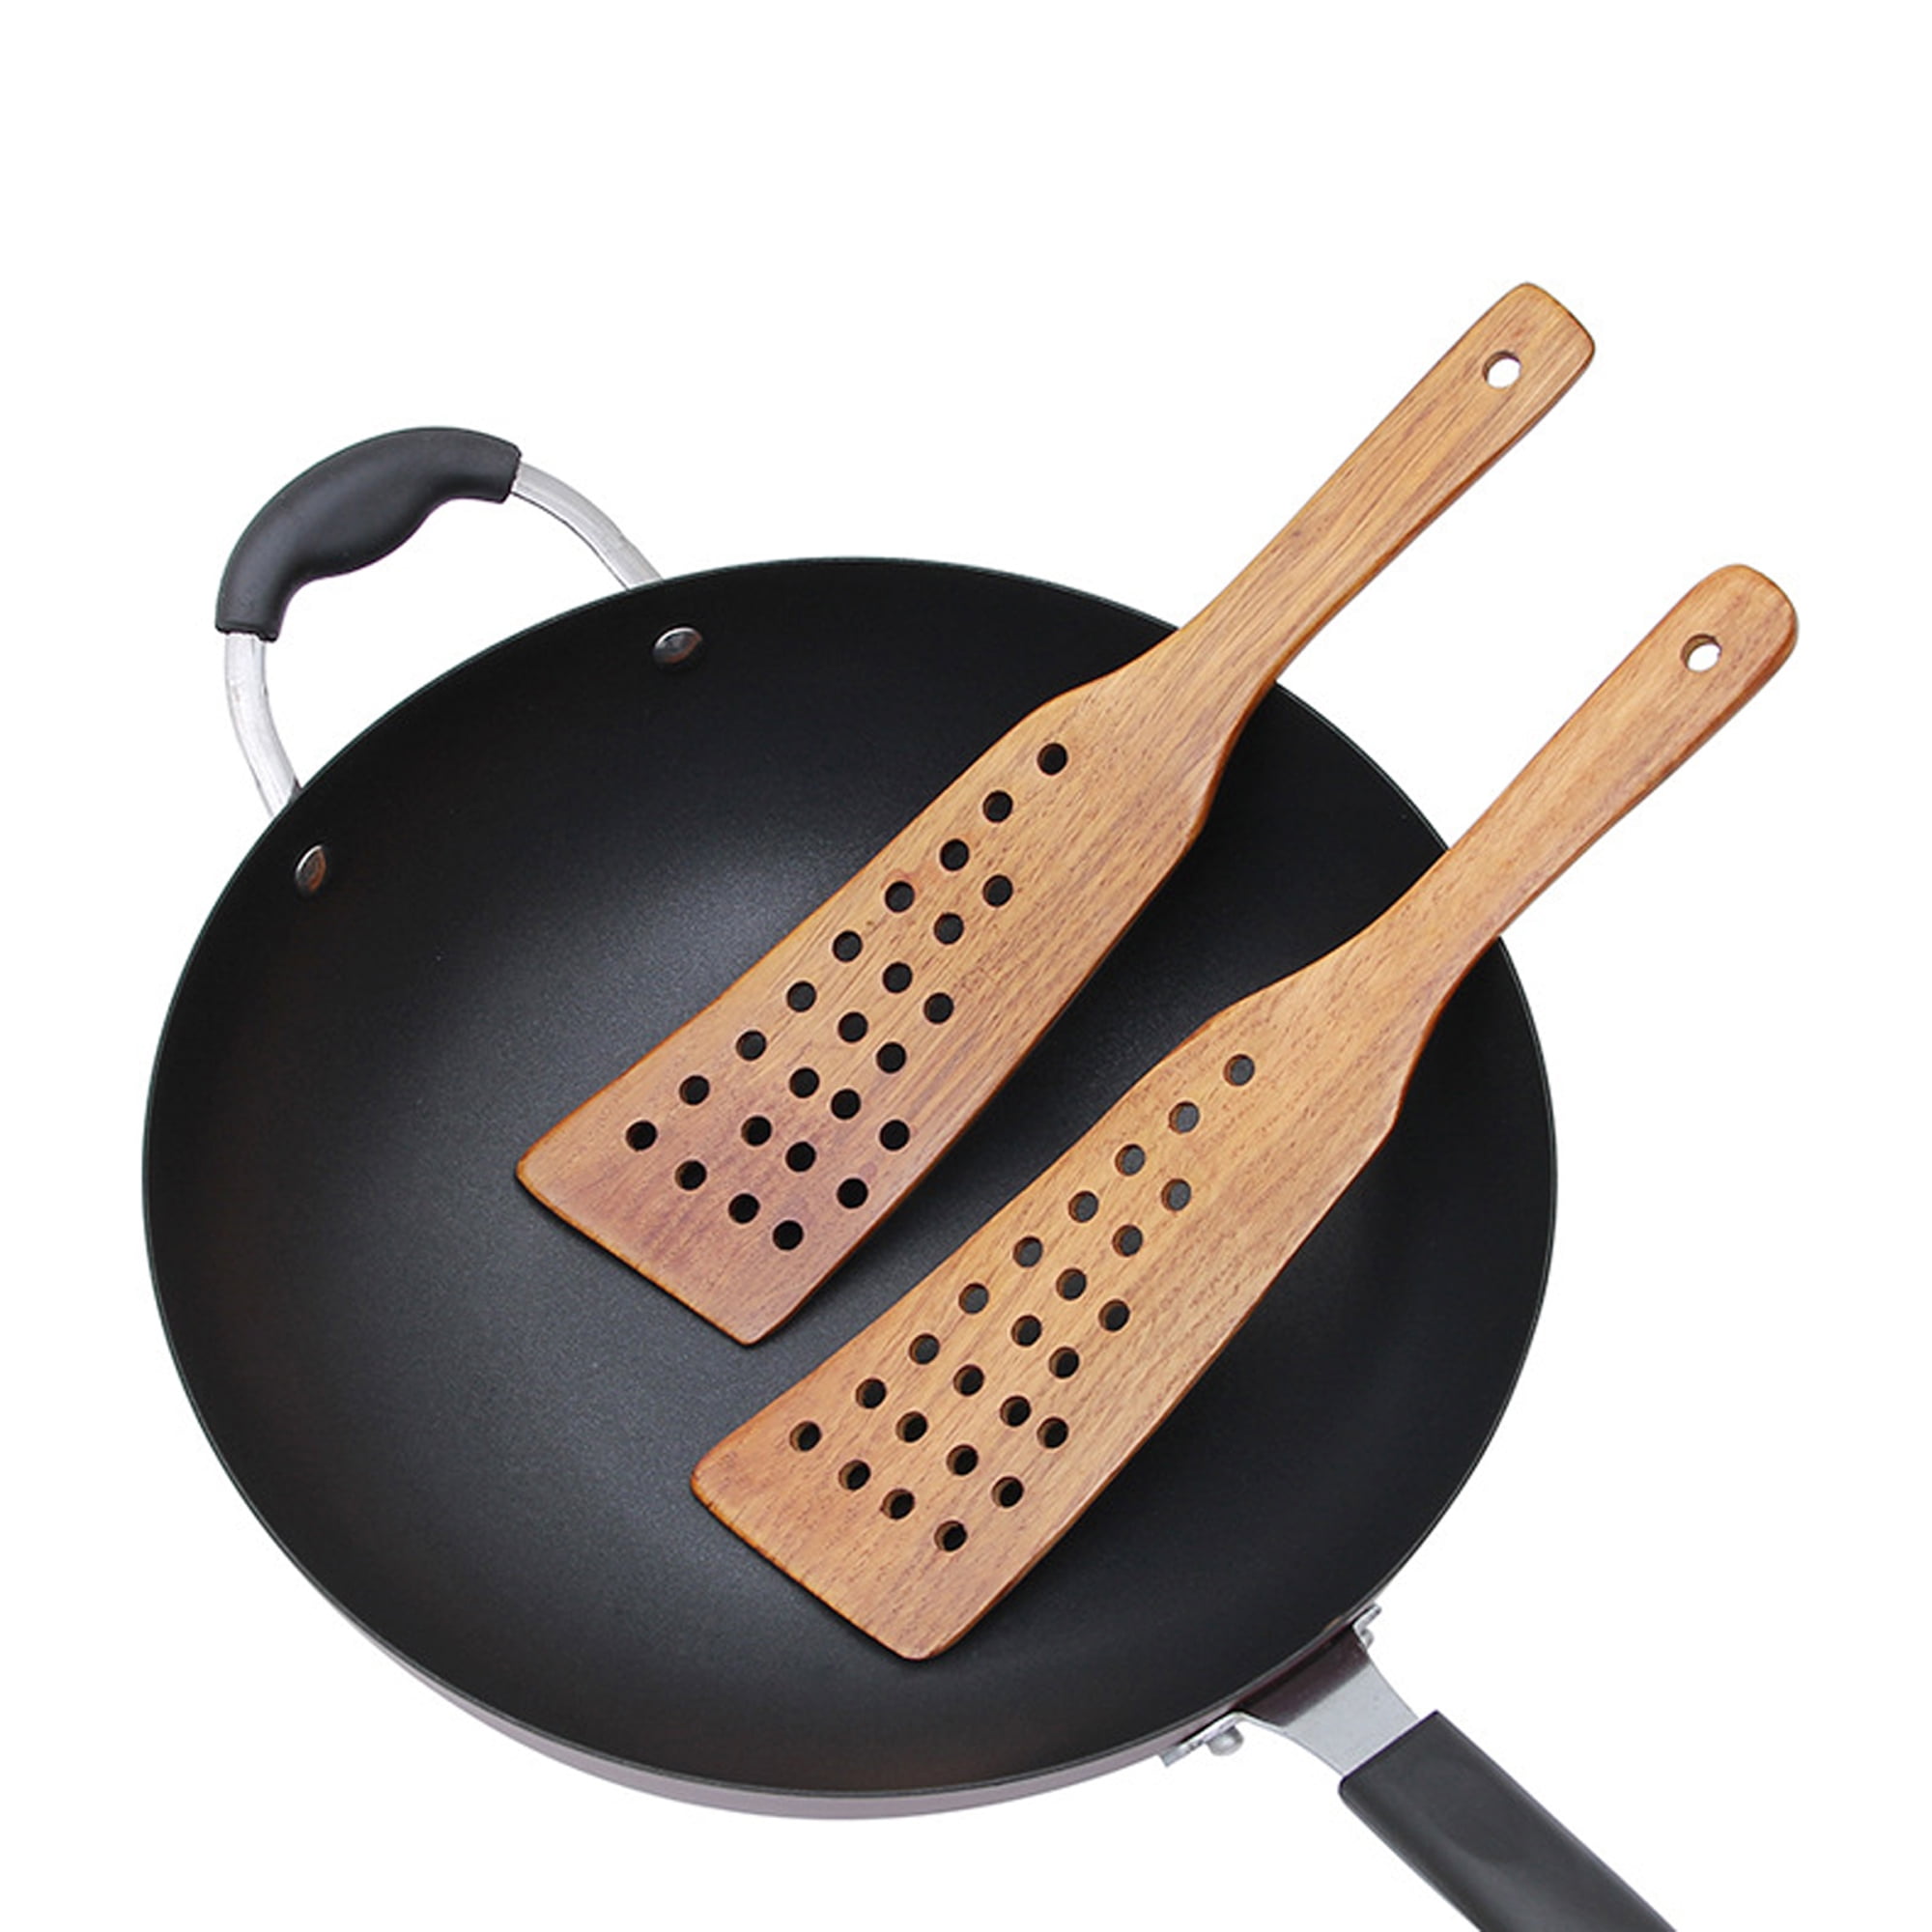 Wooden Spatula Non-Stick Cookware For Cooking Pan Frying Steak Shs6 